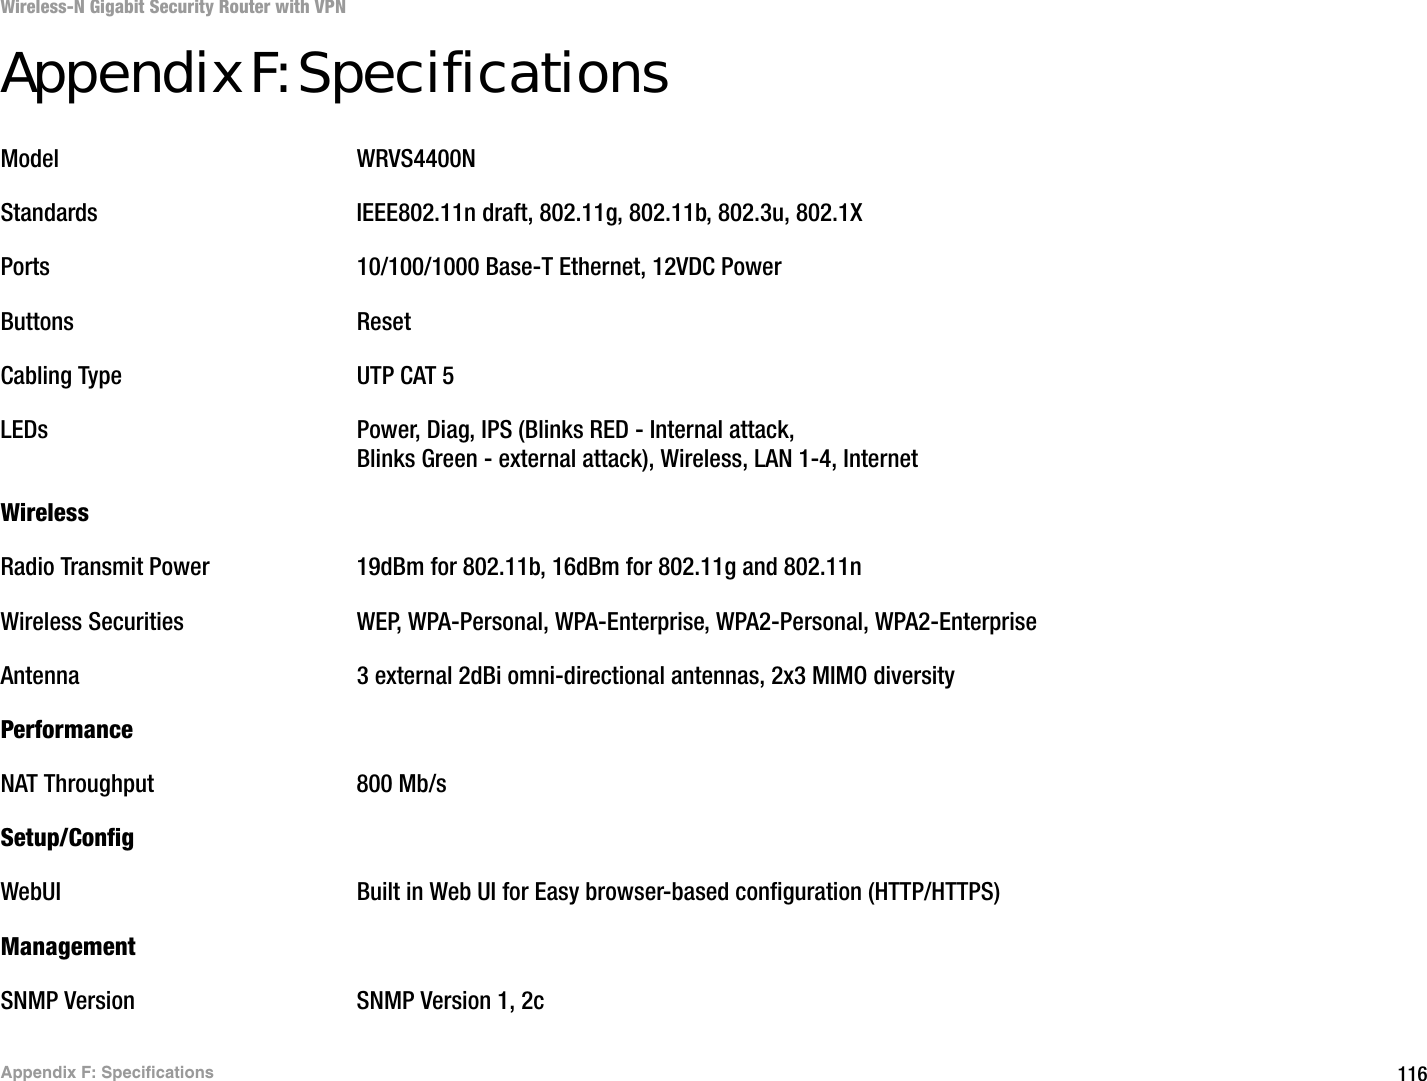 116Appendix F: SpecificationsWireless-N Gigabit Security Router with VPNAppendix F: SpecificationsModel WRVS4400NStandards IEEE802.11n draft, 802.11g, 802.11b, 802.3u, 802.1XPorts 10/100/1000 Base-T Ethernet, 12VDC PowerButtons ResetCabling Type UTP CAT 5 LEDs Power, Diag, IPS (Blinks RED - Internal attack, Blinks Green - external attack), Wireless, LAN 1-4, Internet WirelessRadio Transmit Power 19dBm for 802.11b, 16dBm for 802.11g and 802.11nWireless Securities WEP, WPA-Personal, WPA-Enterprise, WPA2-Personal, WPA2-EnterpriseAntenna 3 external 2dBi omni-directional antennas, 2x3 MIMO diversityPerformanceNAT Throughput 800 Mb/sSetup/ConfigWebUI Built in Web UI for Easy browser-based configuration (HTTP/HTTPS)ManagementSNMP Version SNMP Version 1, 2c